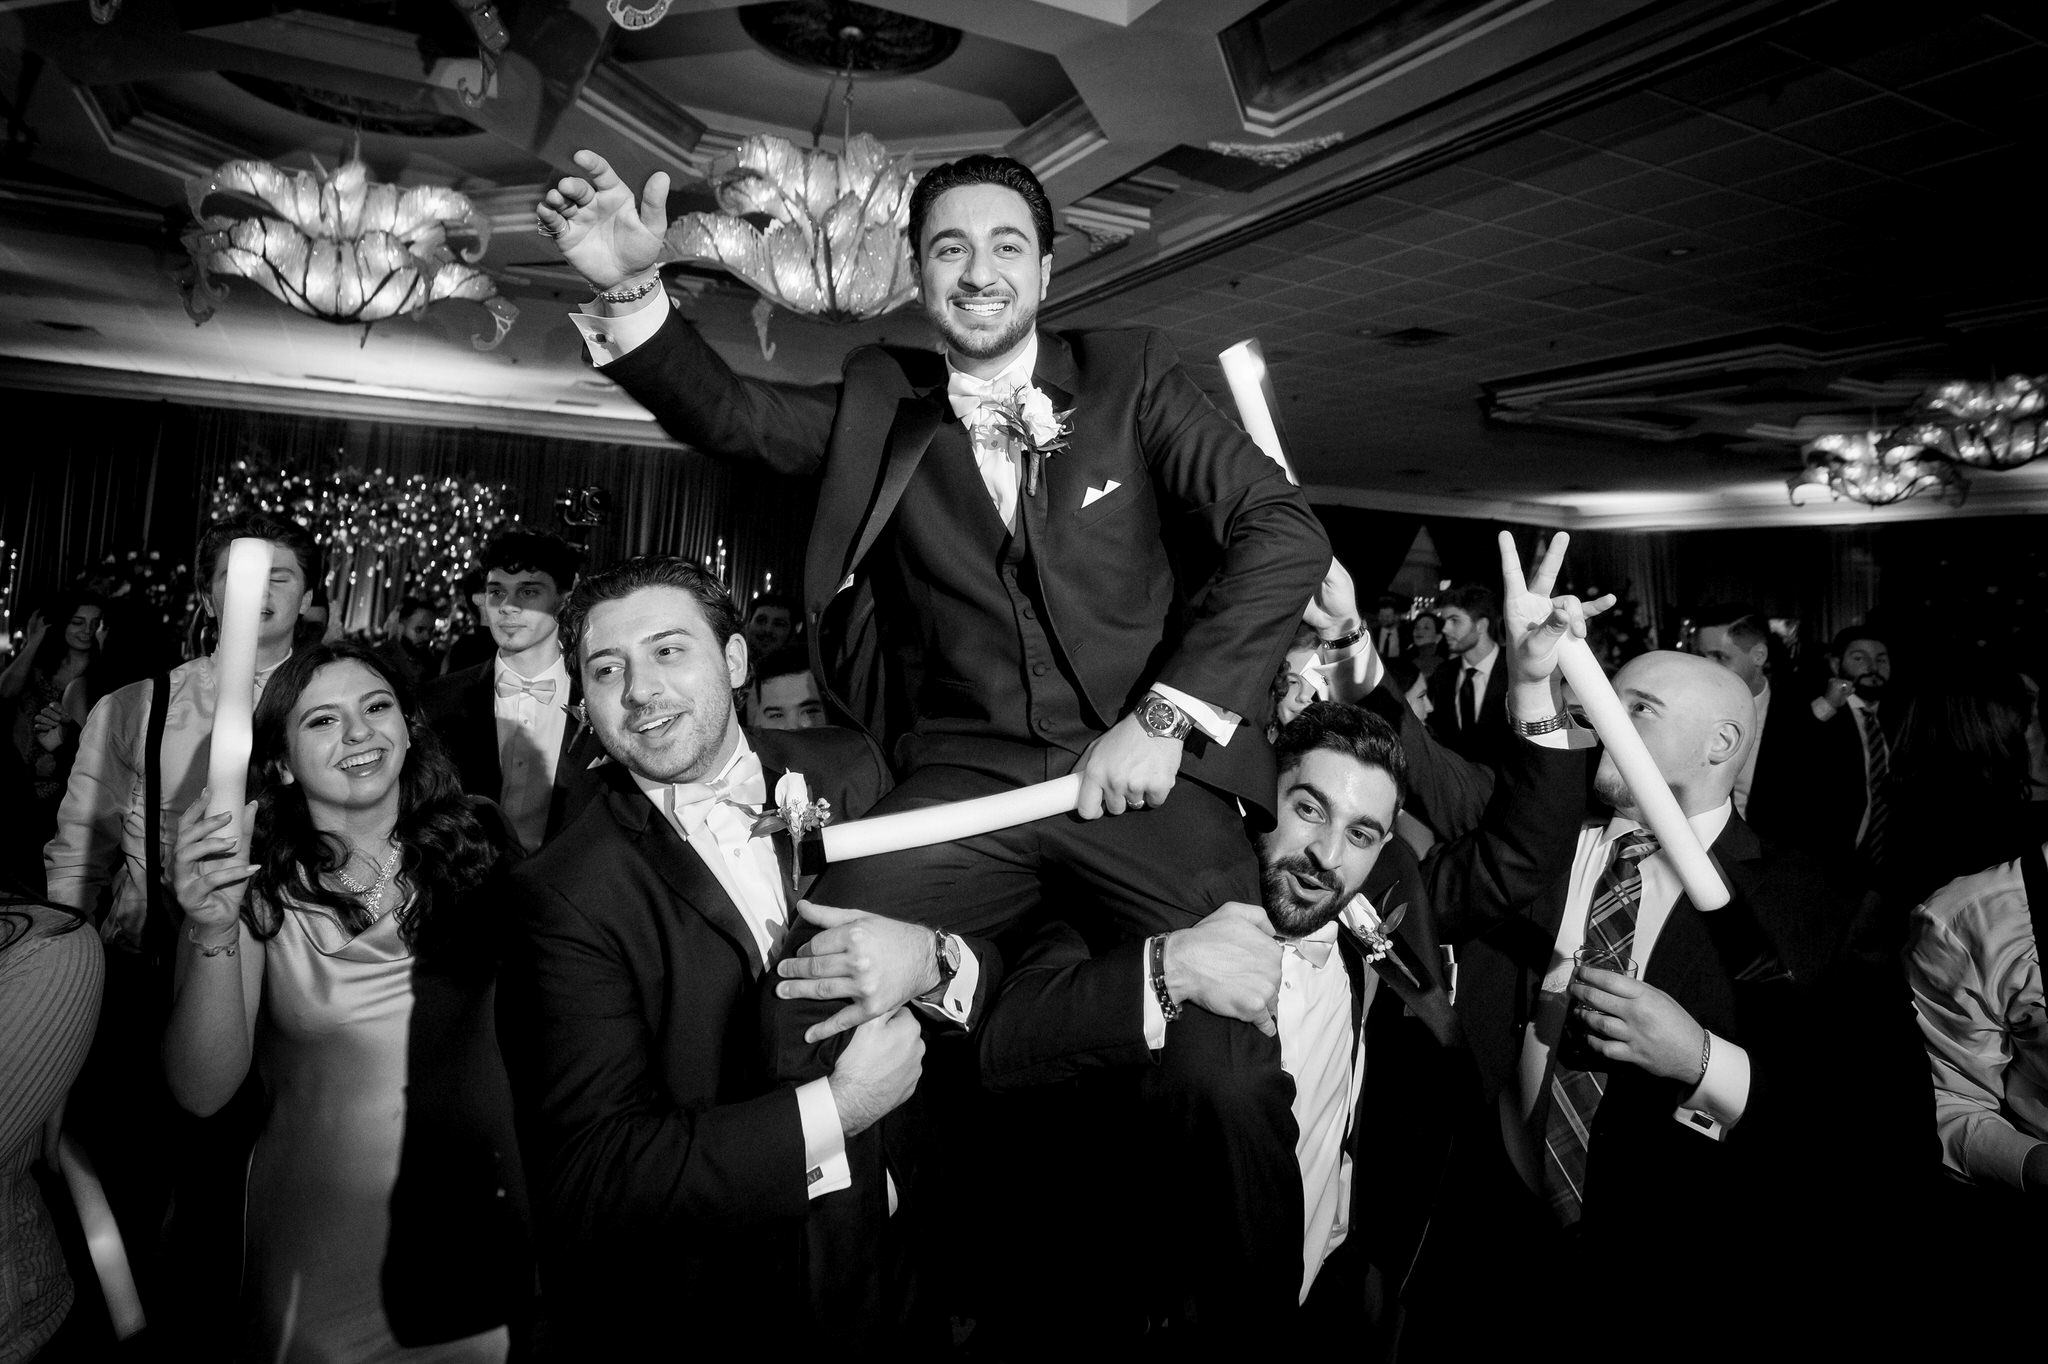 The groom is hosted on the shoulders of groomsmen on the dance floor at a Penna's of Sterling wedding.